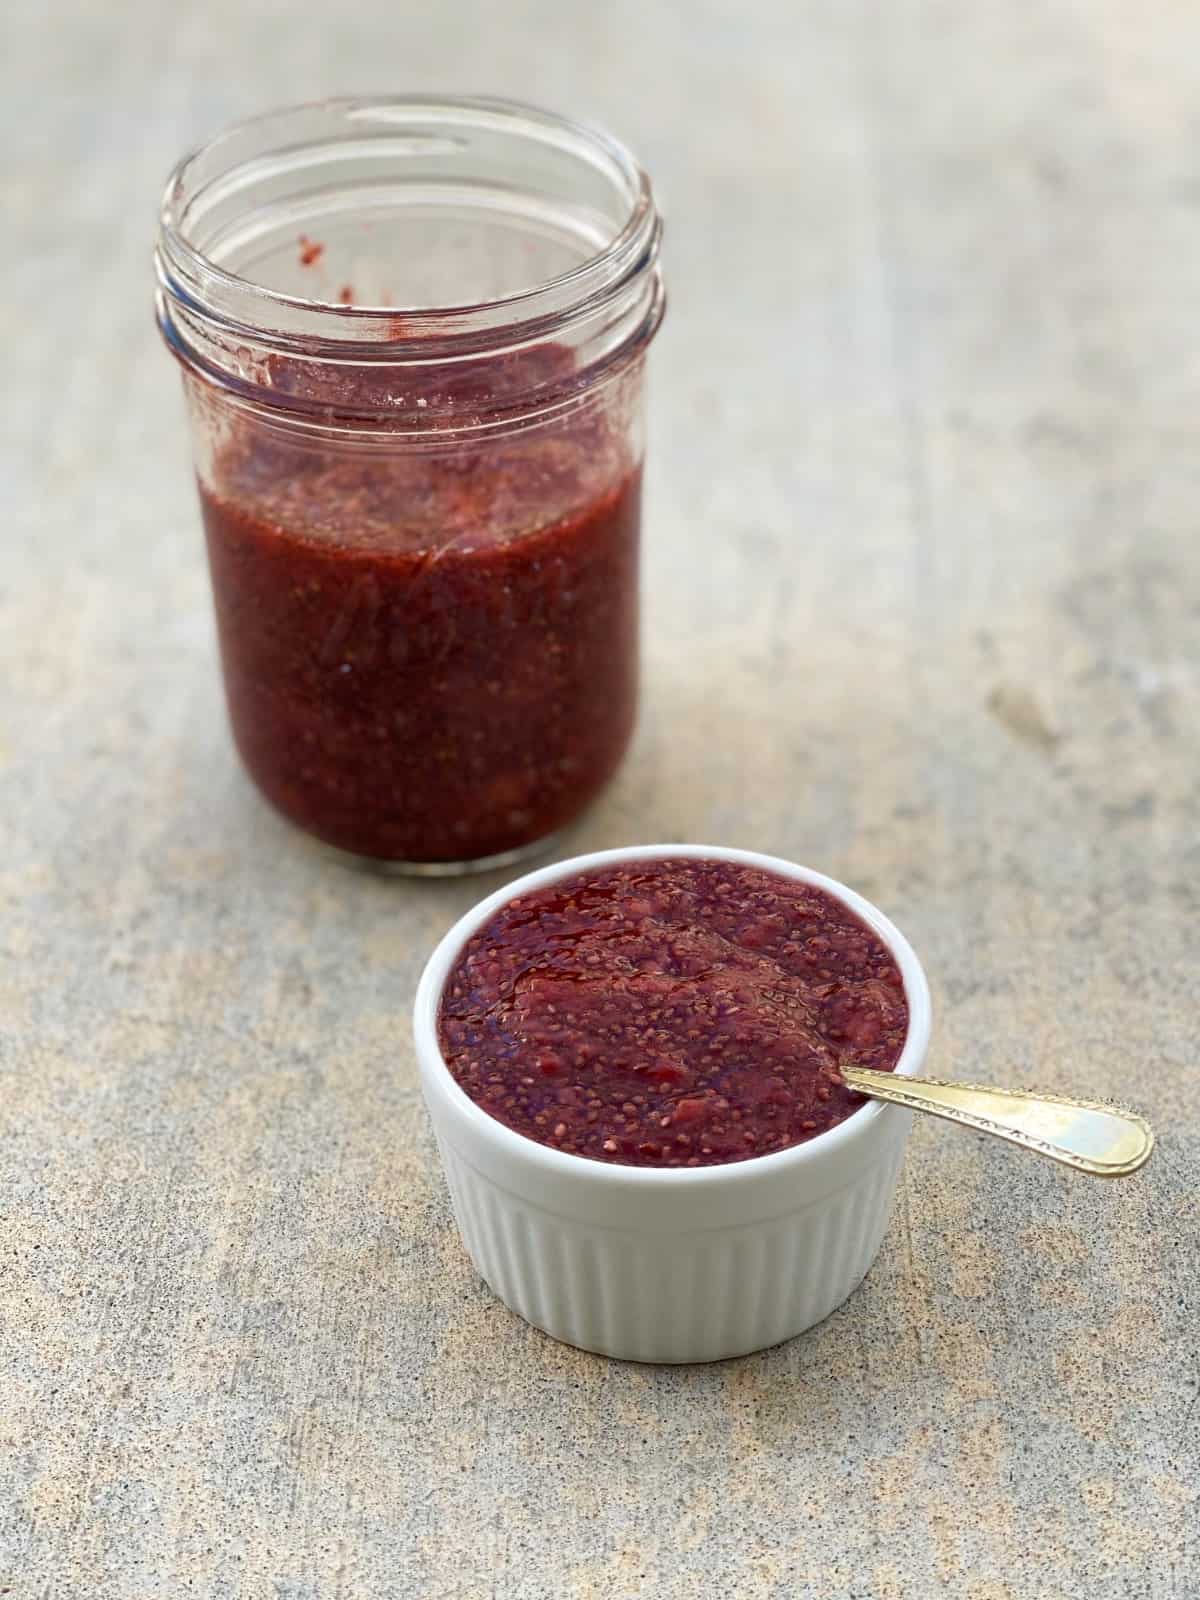 Strawberry chia jam in small white ramekin with spoon and large glass jar of jam in the background.